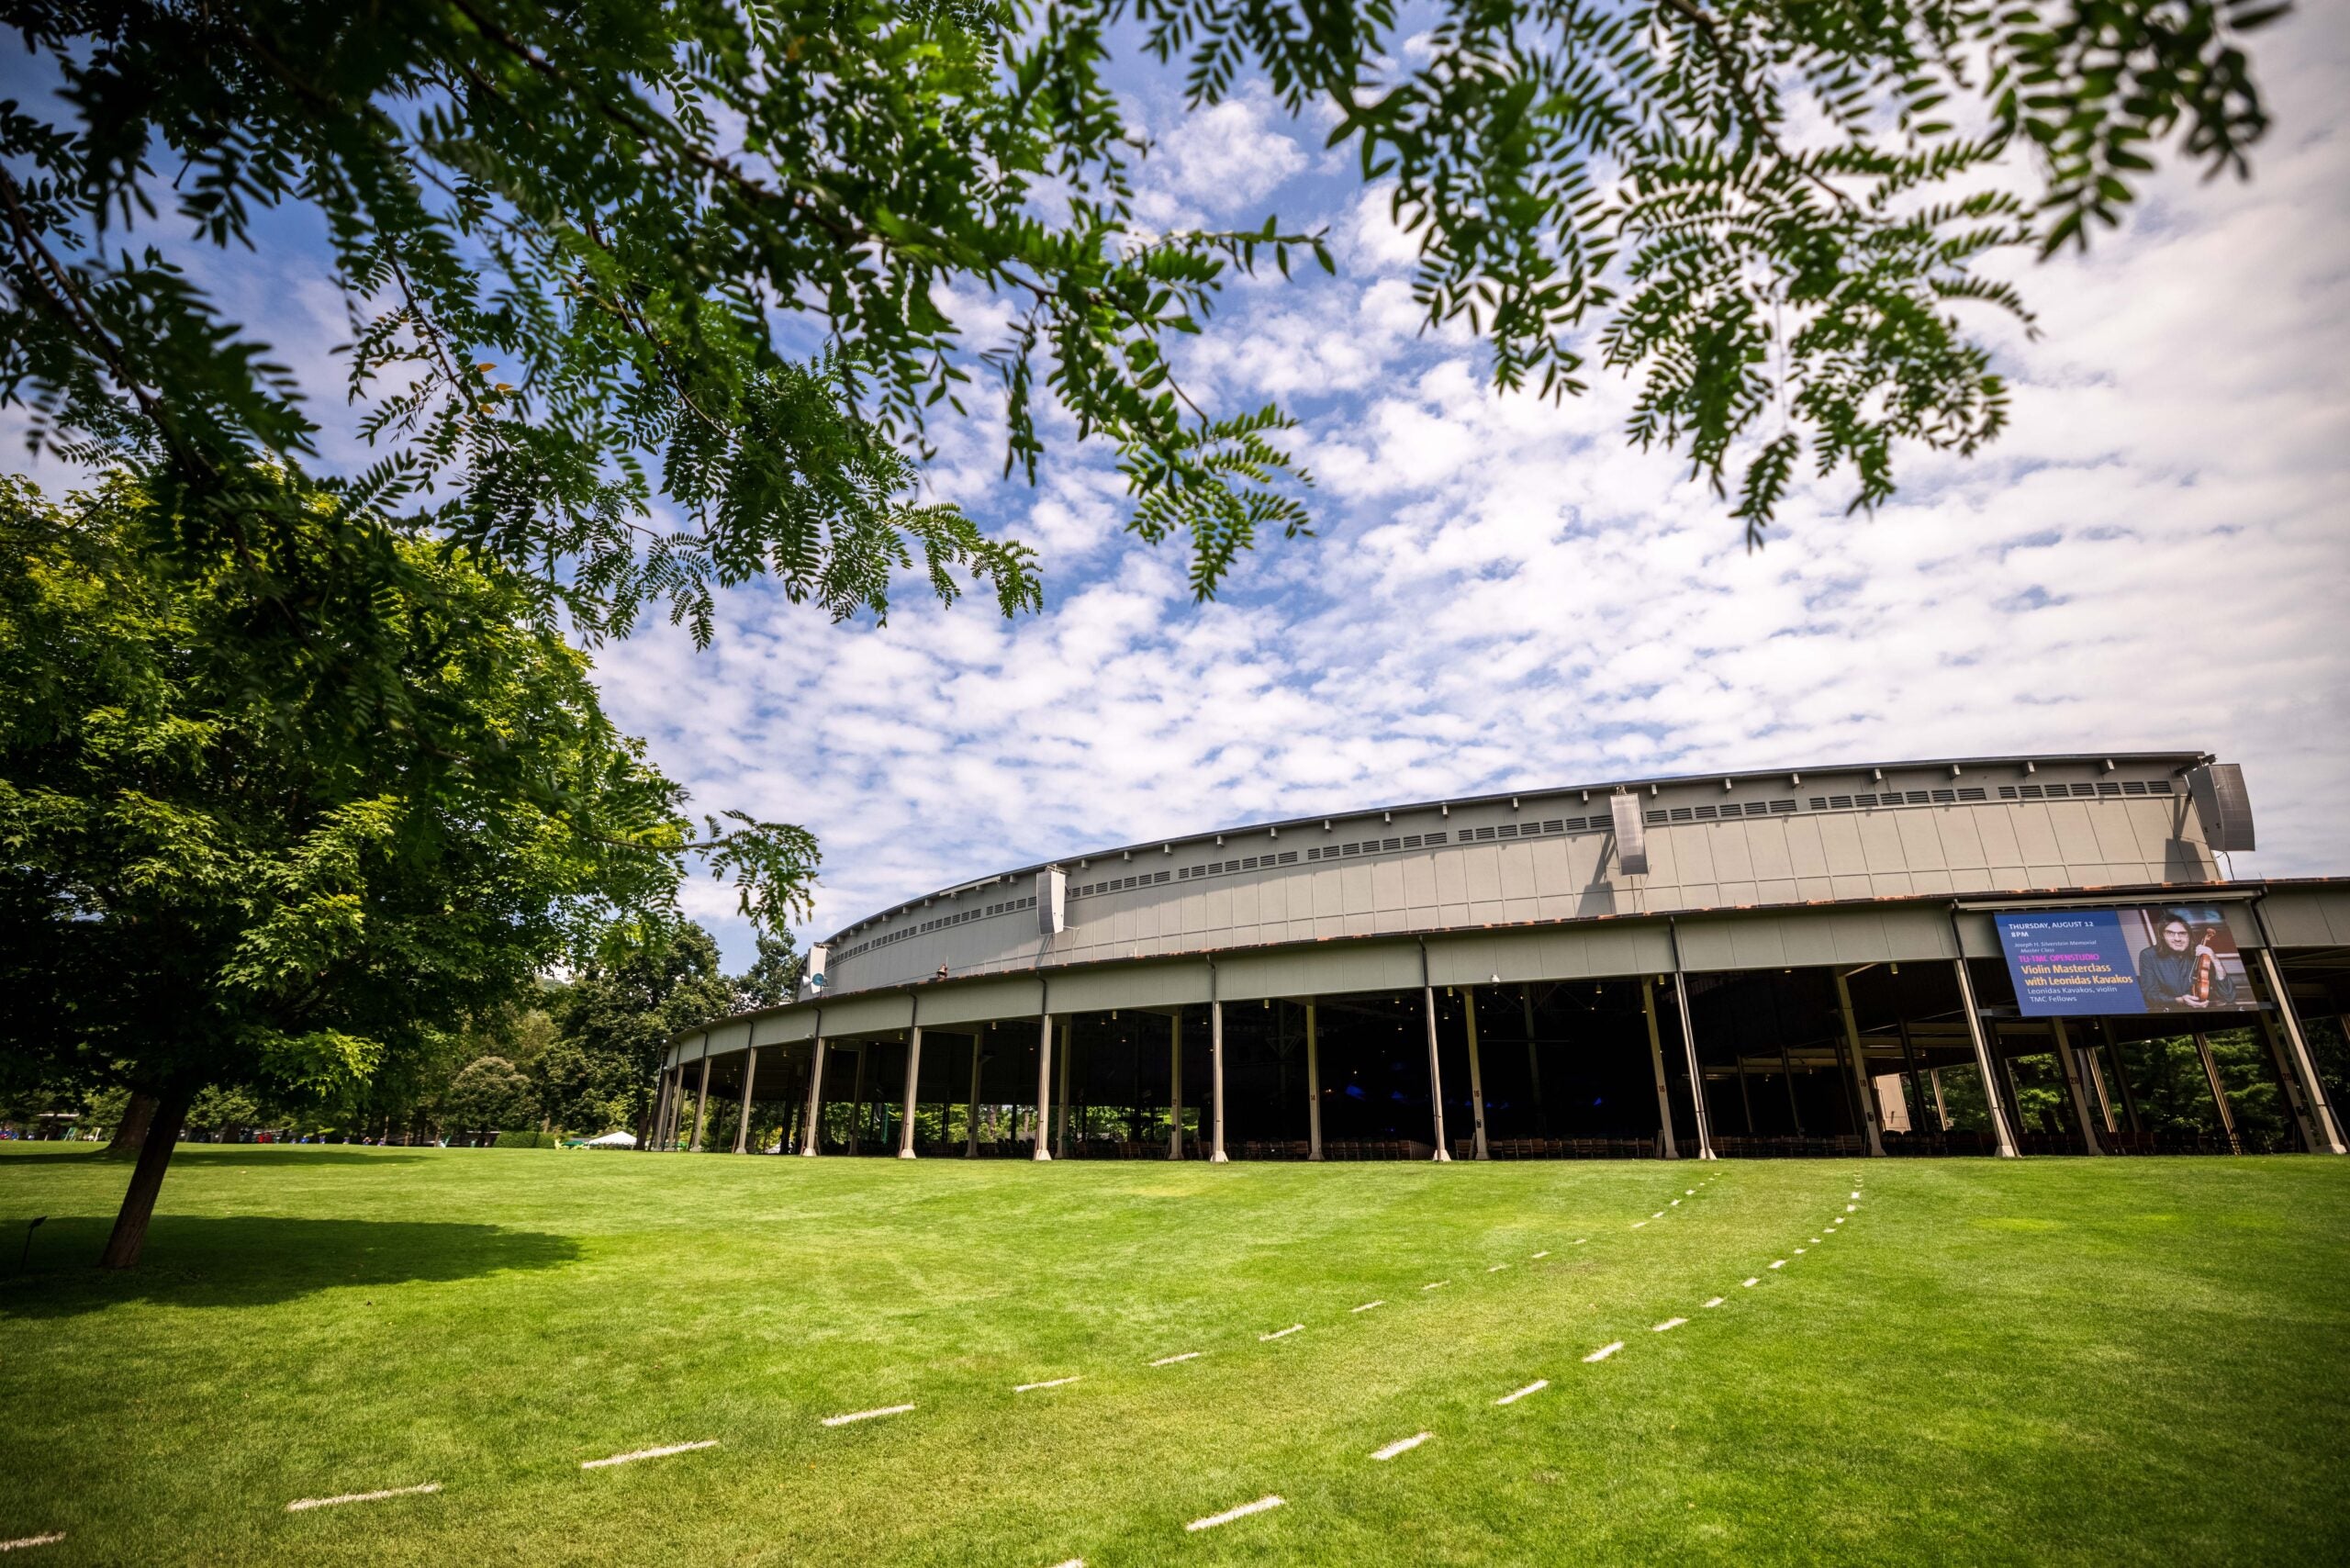 Tanglewood releases its 2022 lineup